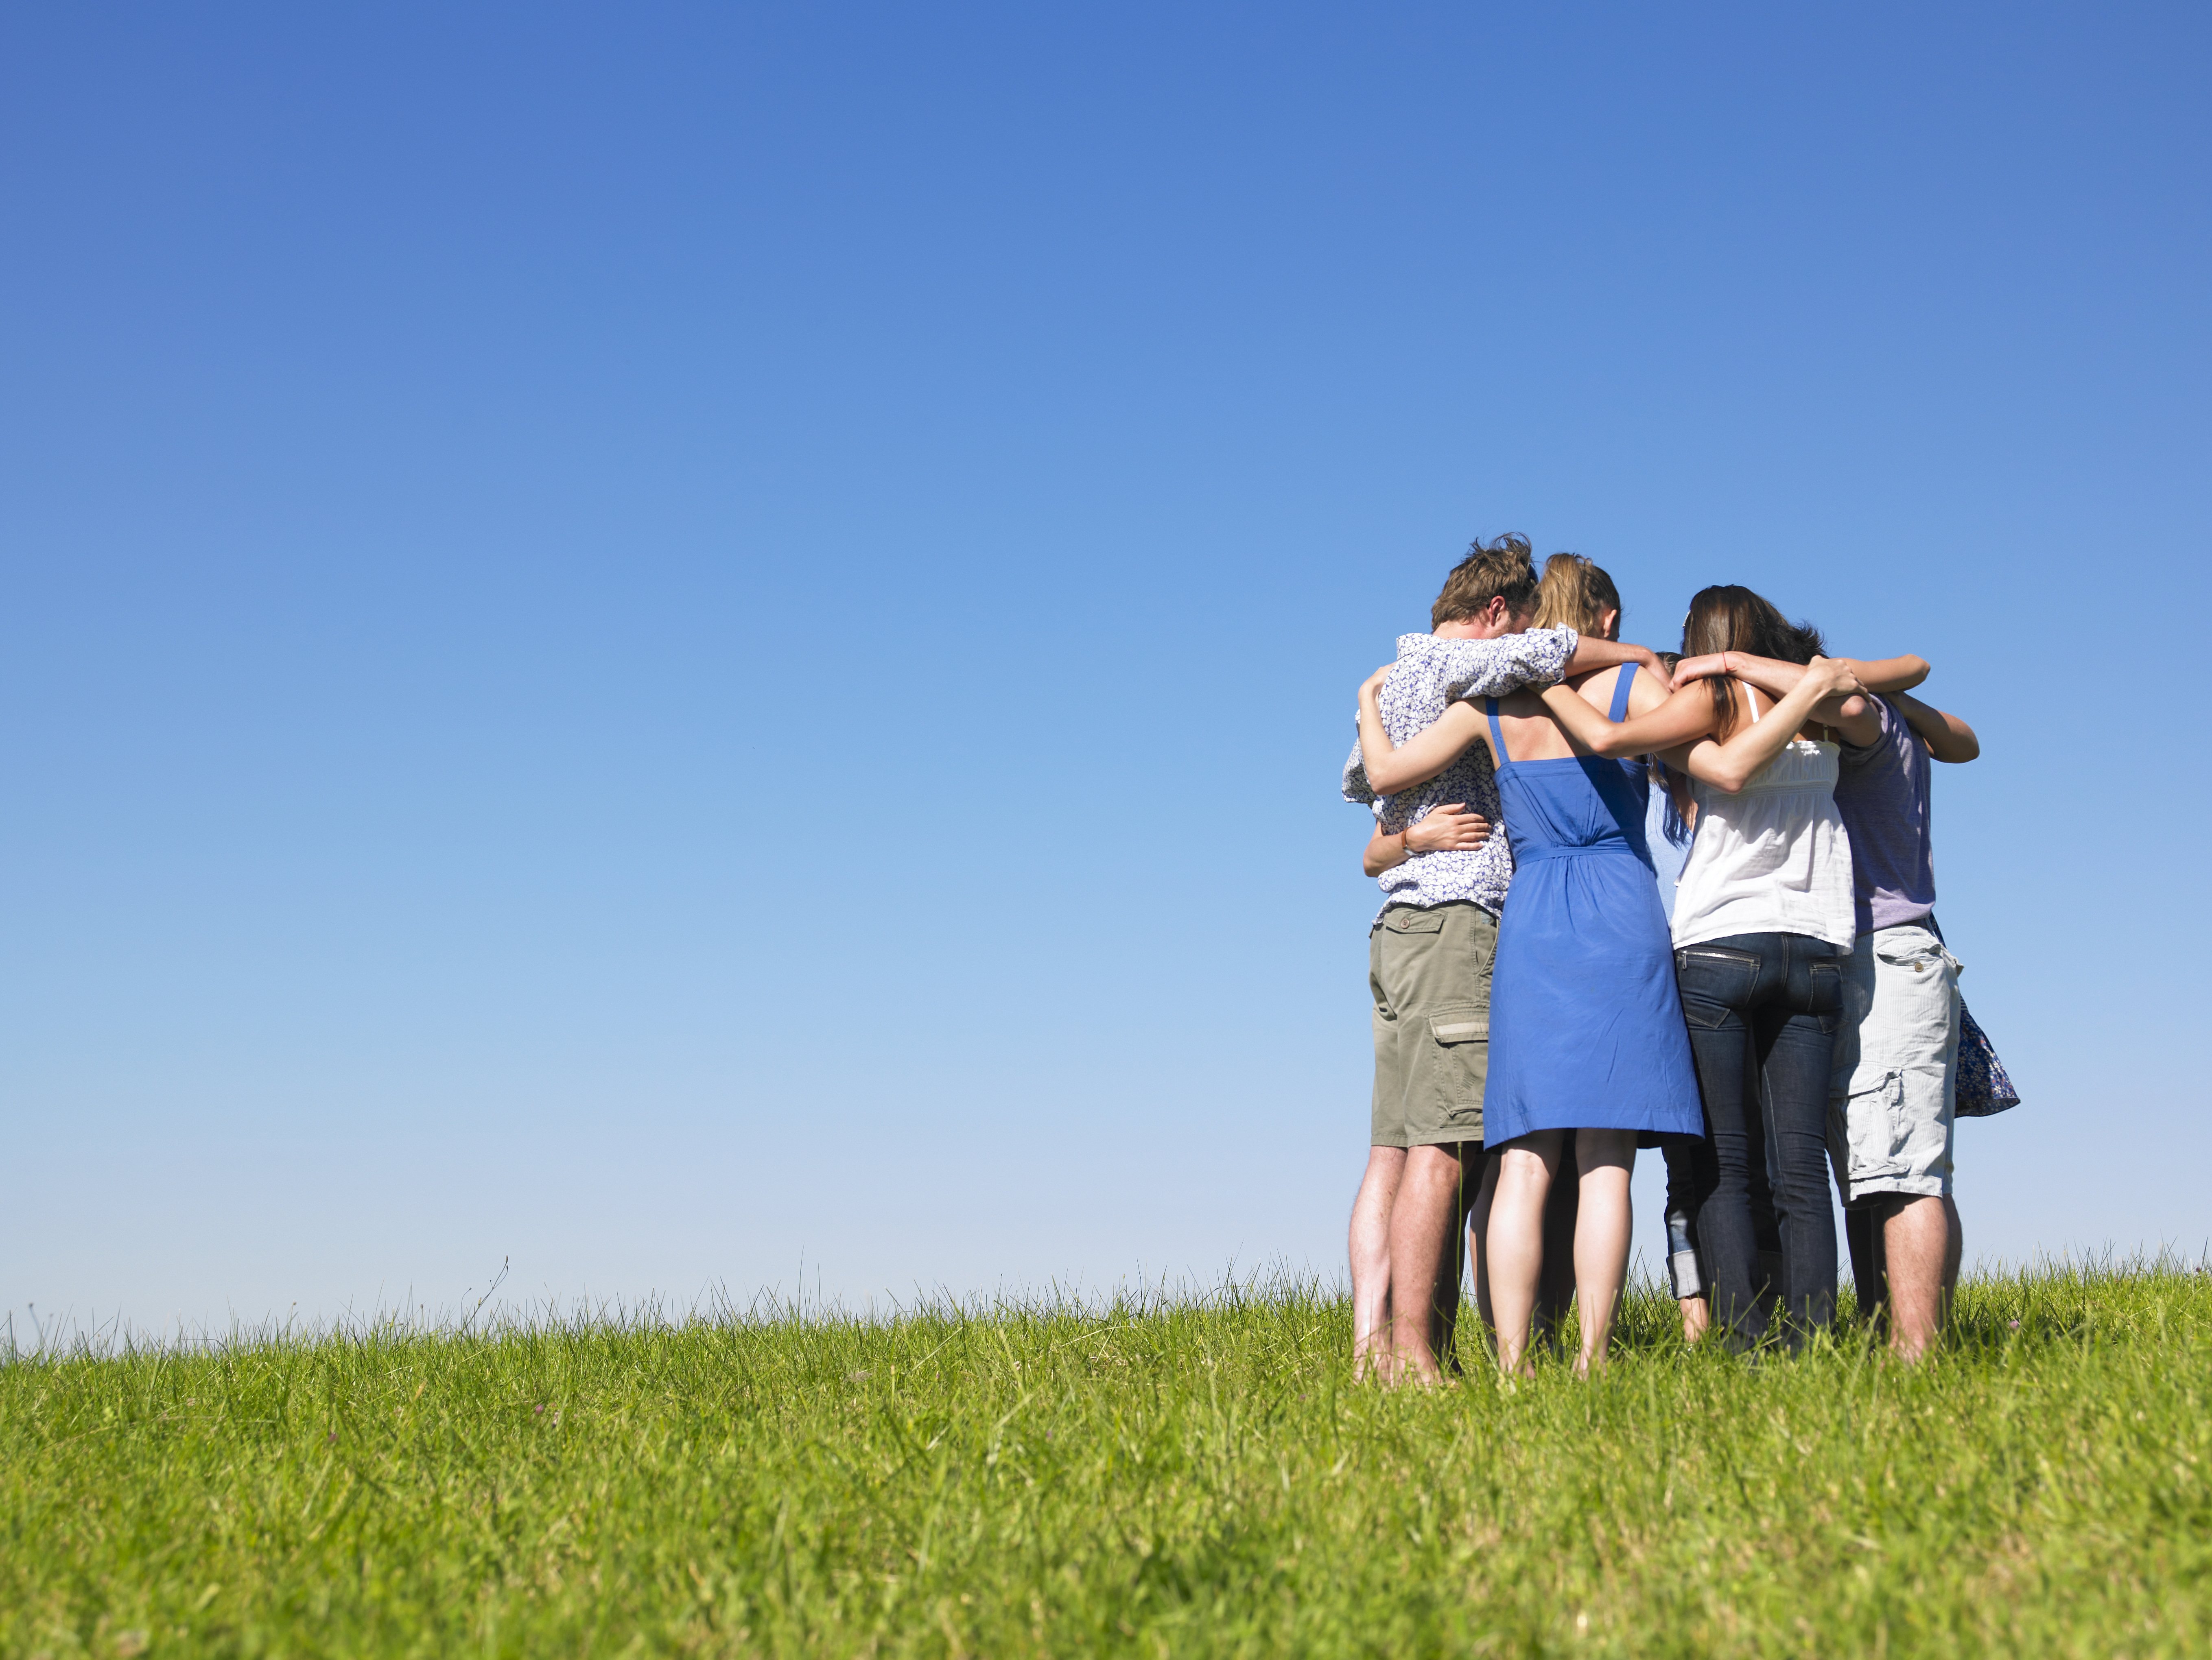 A group of people hugging in a field. │Source: Shutterstock